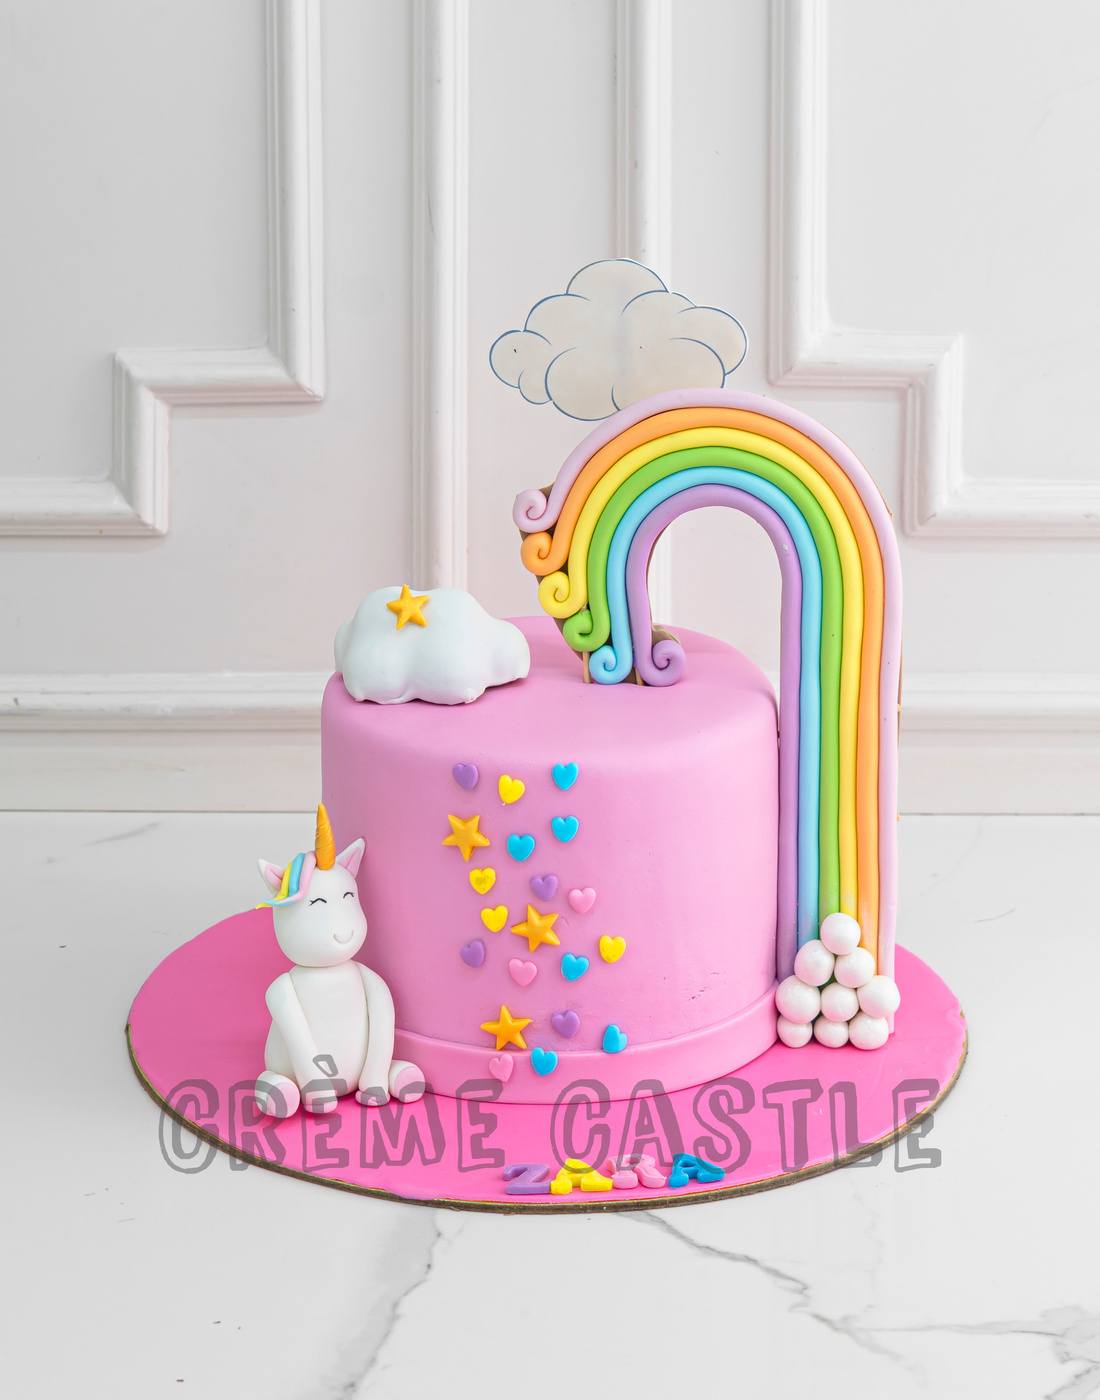 Fondant Unicorn Cake Topper Tutorial (No Fancy Tools Or Molds Needed) -  YouTube